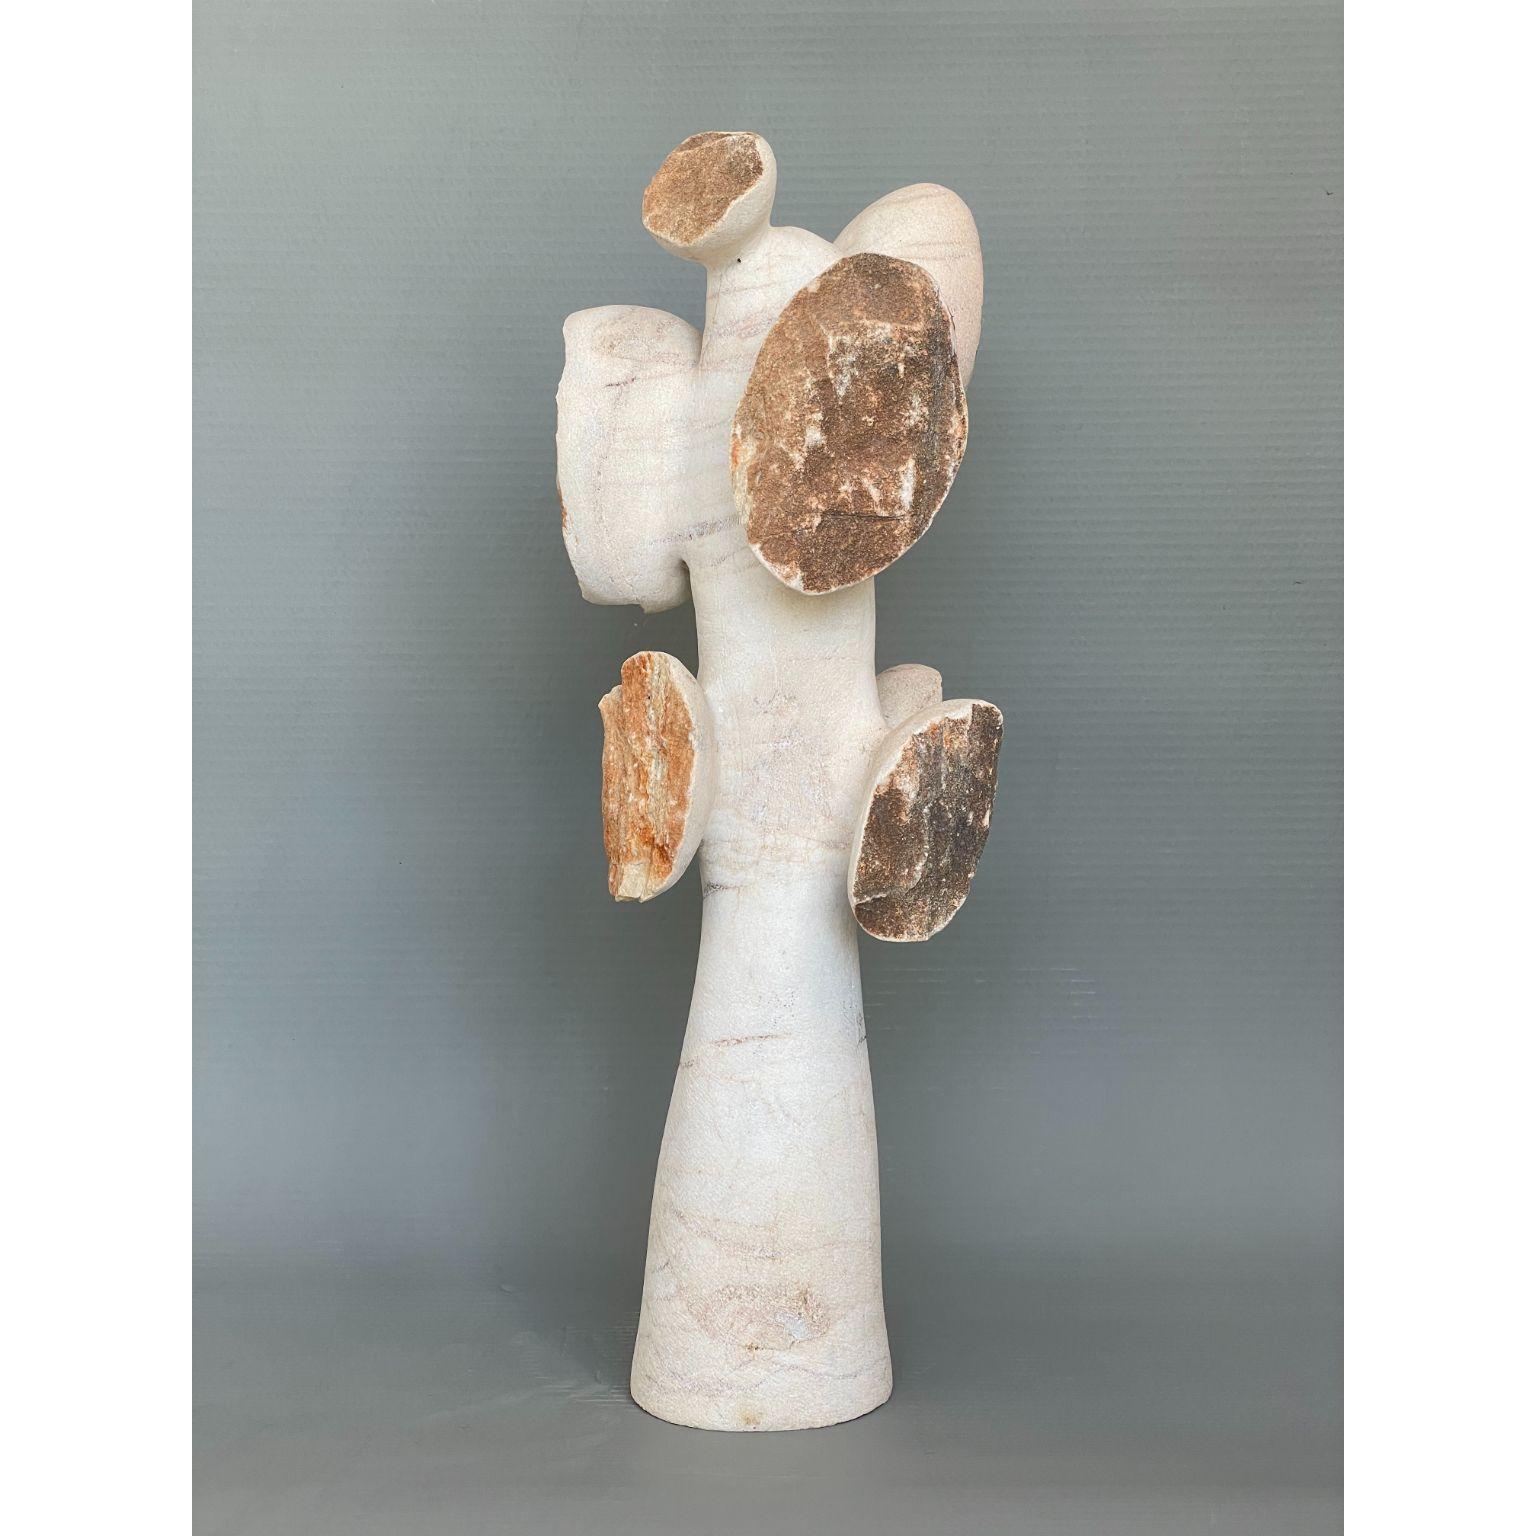 After Nature hand carved marble sculpture by Tom Von Kaenel
Dimensions: D 18 x H 54 cm
Materials: marble

Tom von Kaenel, sculptor and painter, was born in Switzerland in 1961. Already in his early
childhood he was deeply devoted to art. His